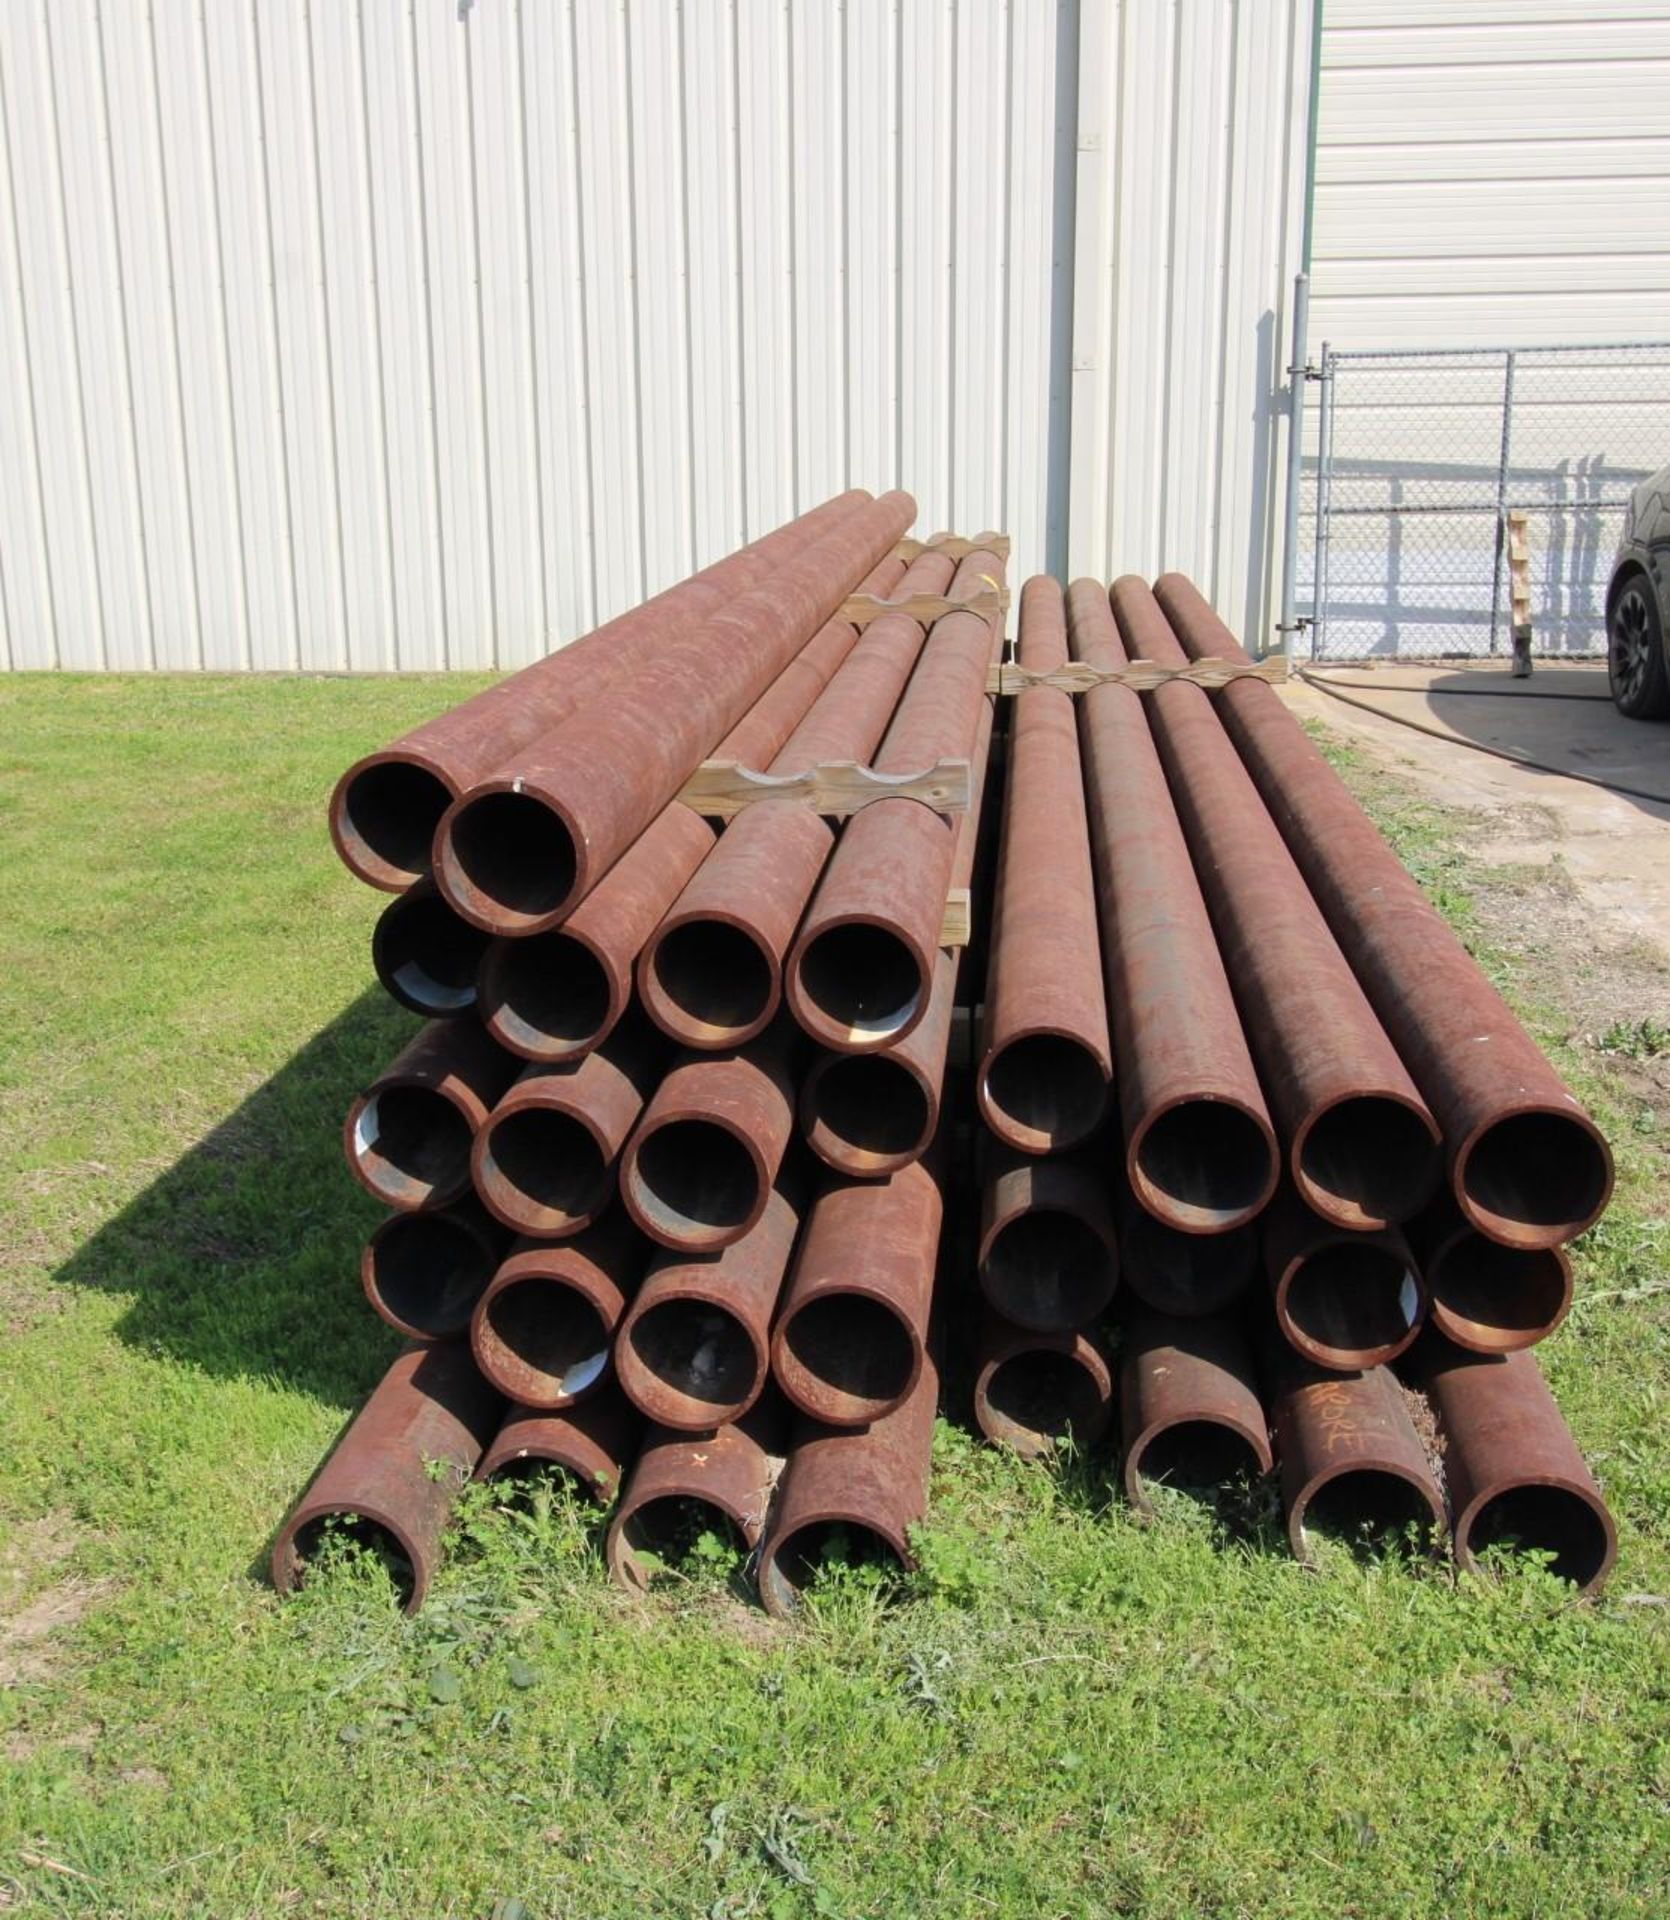 LOT OF ( 30 ) BARS OF 8 1/4" OD X 7. 369" ID X APPROX. 26' L., material is API 5CT, Q125, Baker Spec - Image 2 of 4